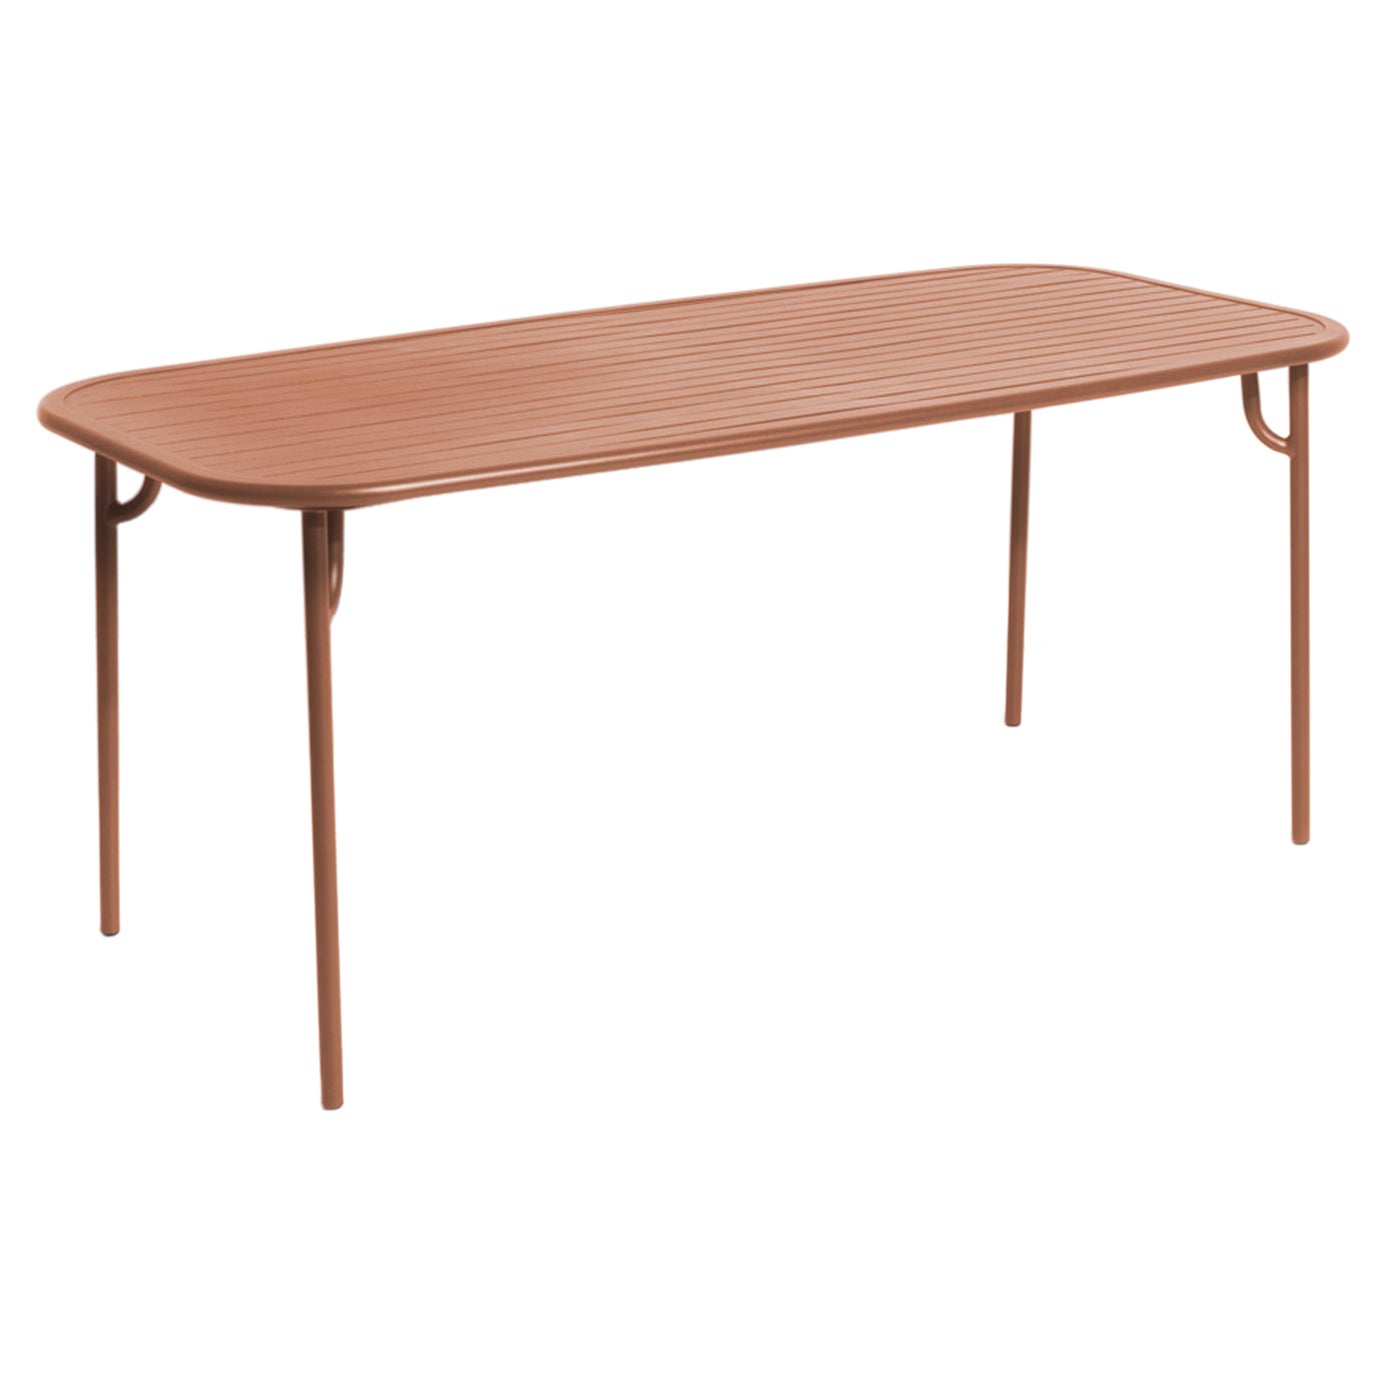 Petite Friture Week-End Medium Rectangular Dining Table in Terracotta with Slats